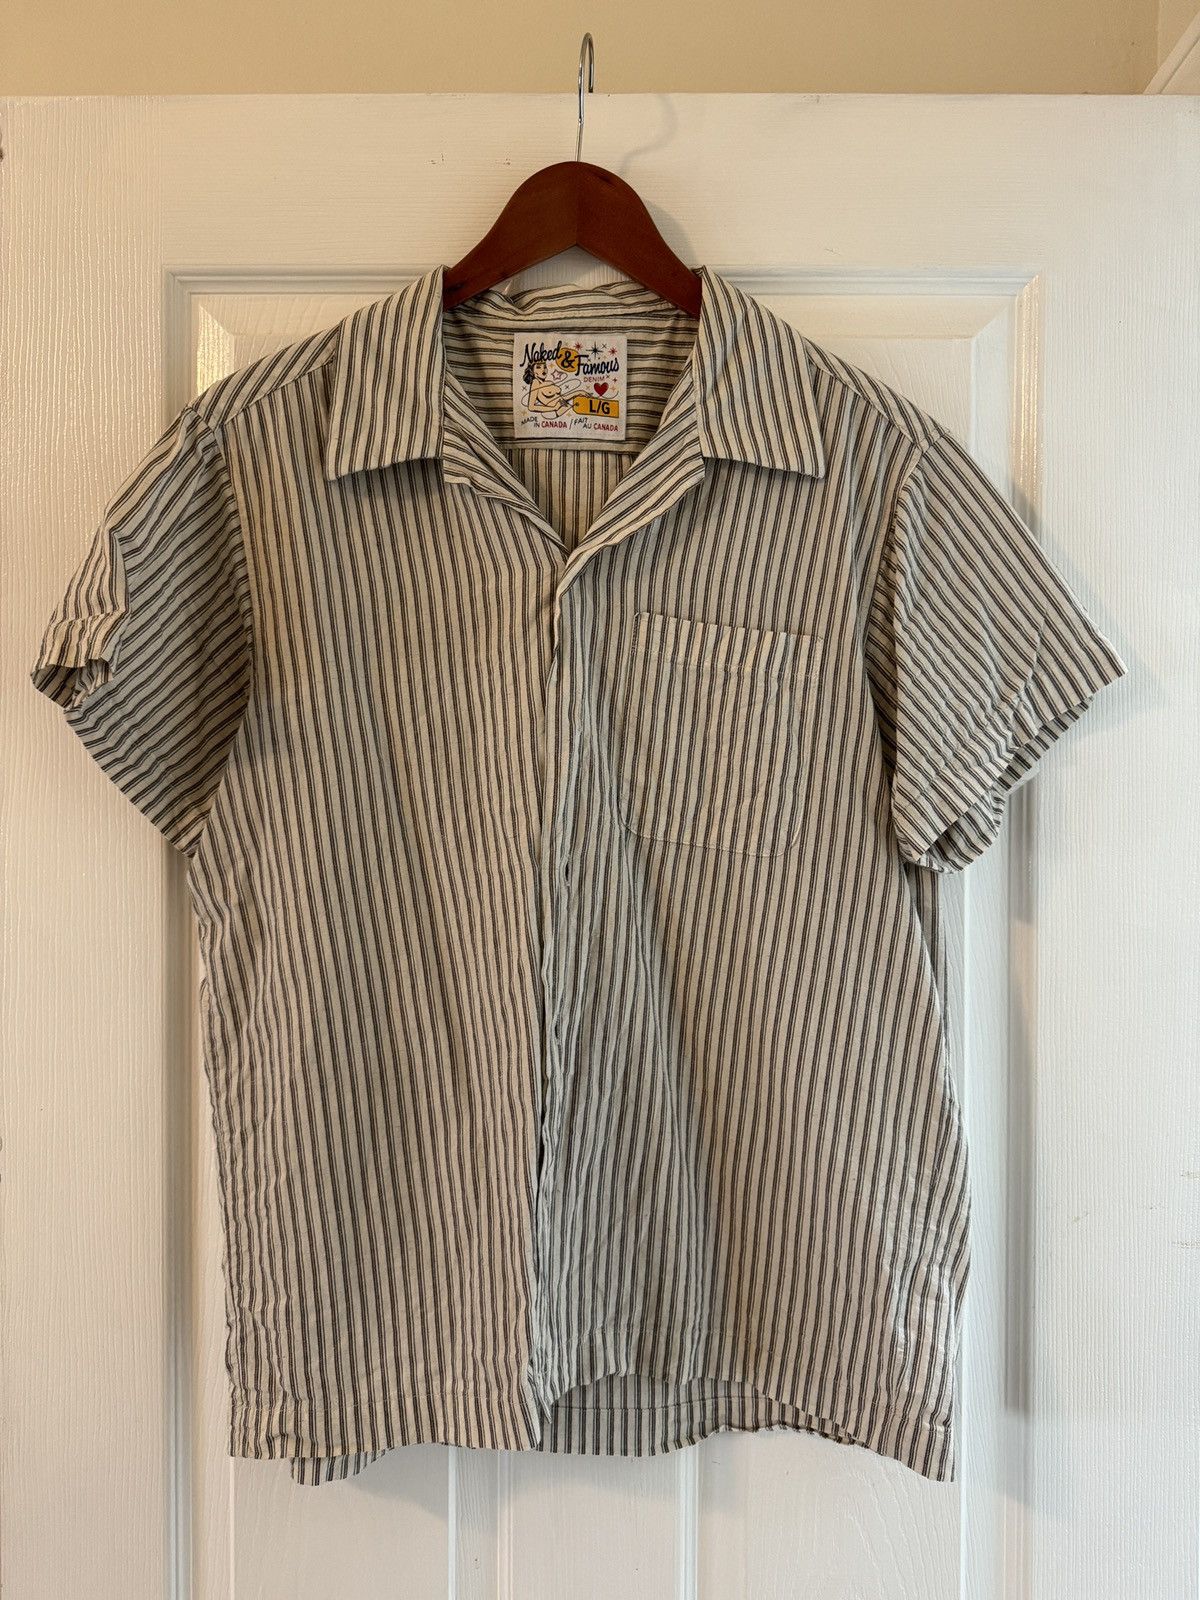 Naked & Famous Hawaiian Button Down Size US L / EU 52-54 / 3 - 1 Preview